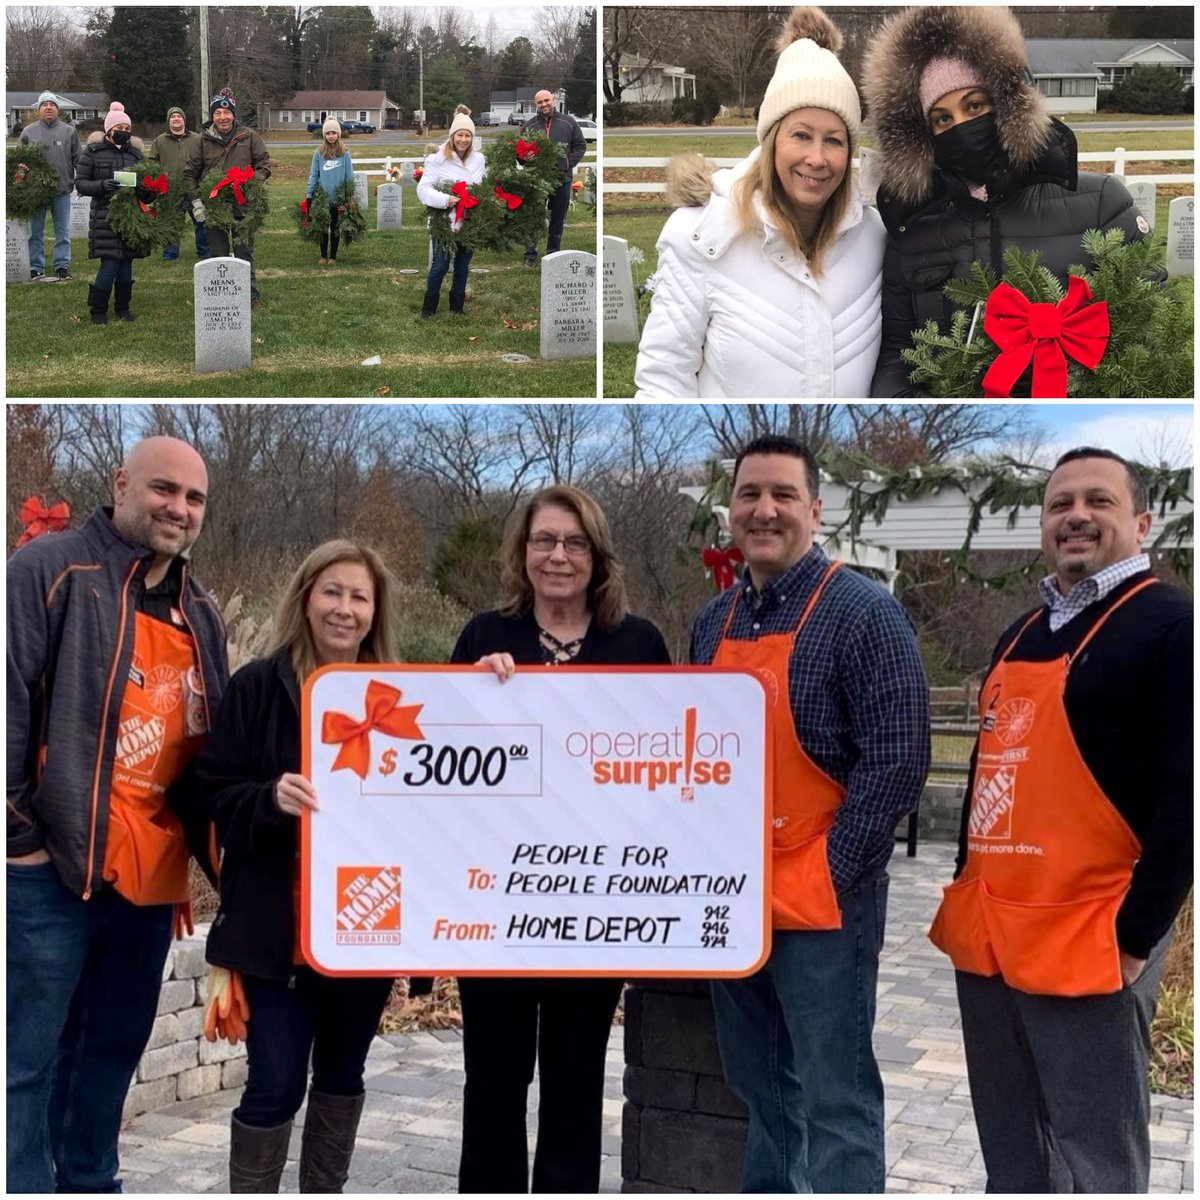 What a wonderful example of our @HomeDepot values!🧡12th Annual Wreaths of Remembrance, honoring 3000 SJ veterans! 🇺🇲 We are so proud of these HomeDepot leaders! @JennNJM @wilkie_cindy @tperez1120 @thecava4 @TimJacobs23HD @LundholmPaul @crystal_hanlon @ChristineTHD @HomeDepot